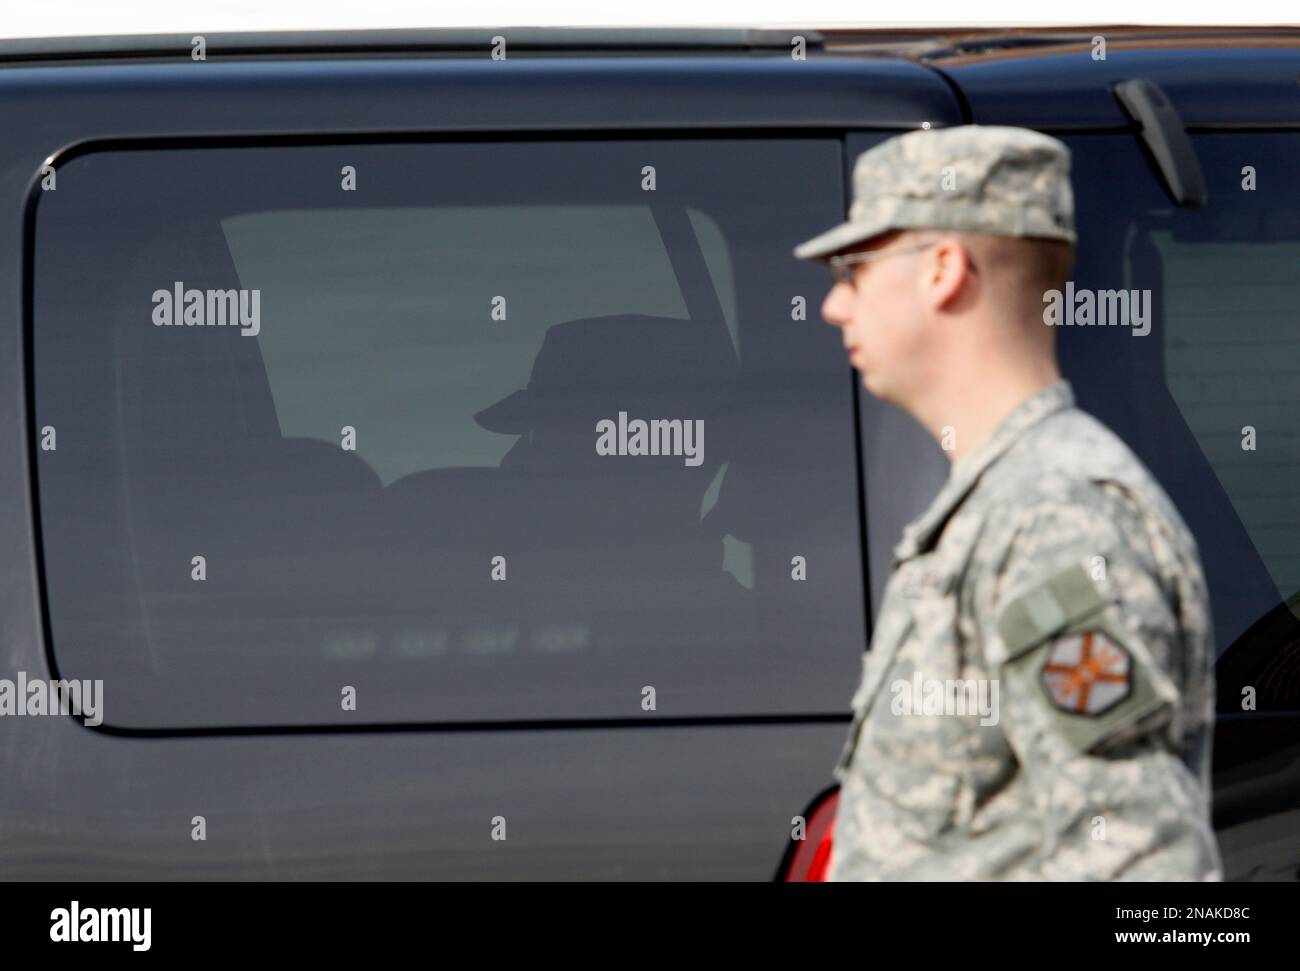 Army Pfc. Bradley Manning sits in the back seat of a departing security  vehicle as a soldier walks by outside a courthouse in Fort Meade, Md.,  Thursday, Dec. 22, 2011, after closing